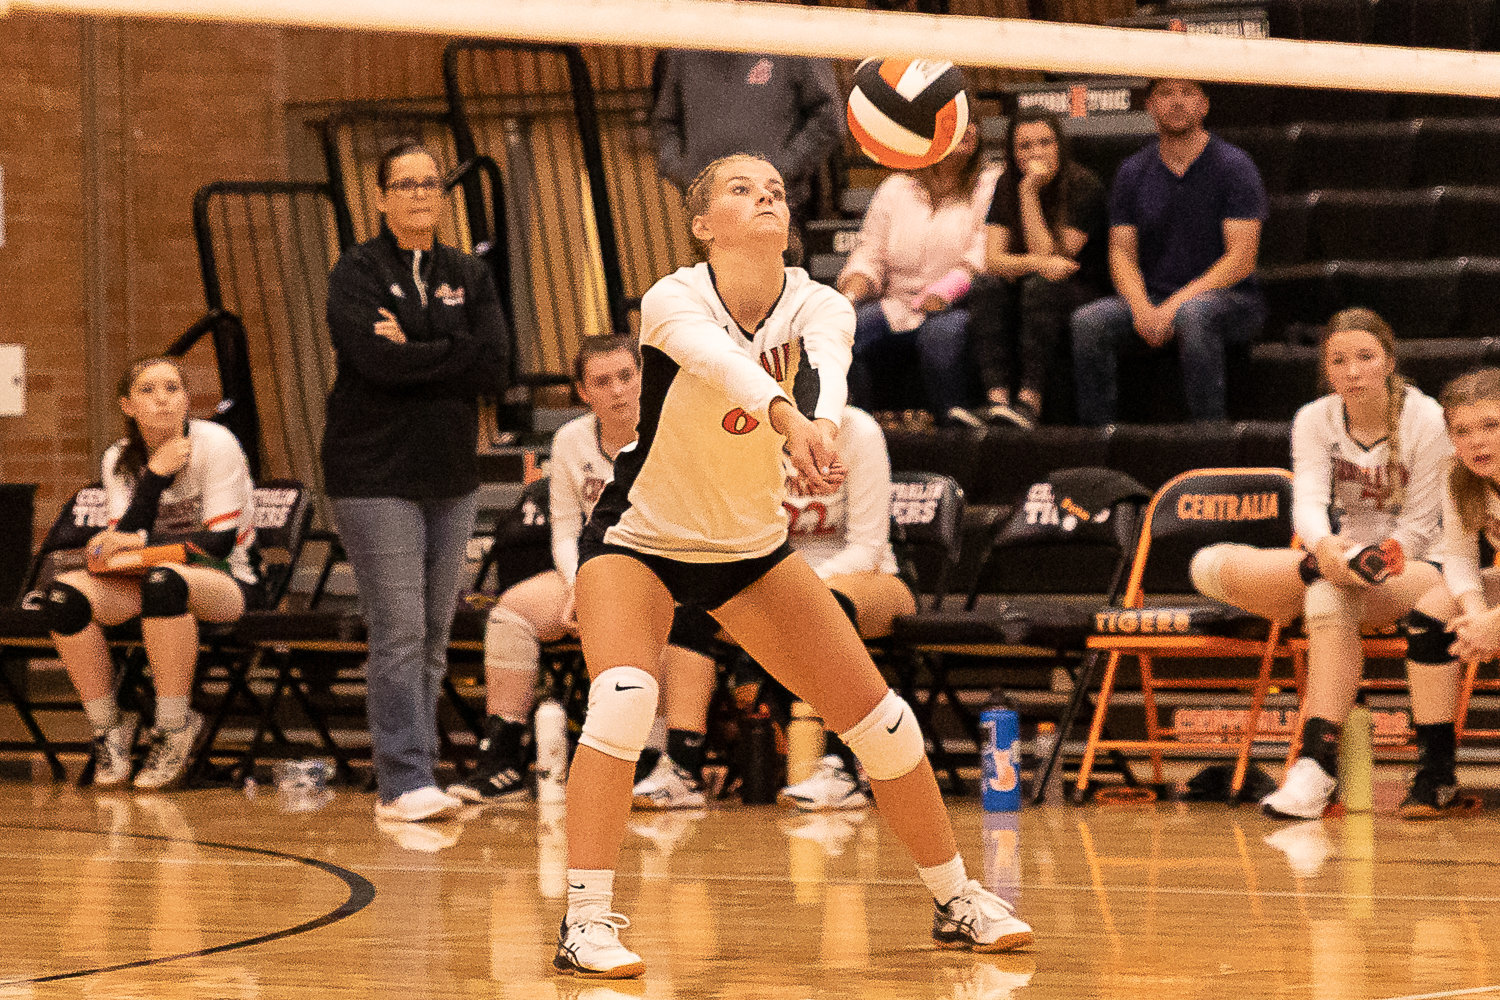 Centralia defensive specialist Alayna Mcgregor digs up a ball against Heritage Sept. 8.